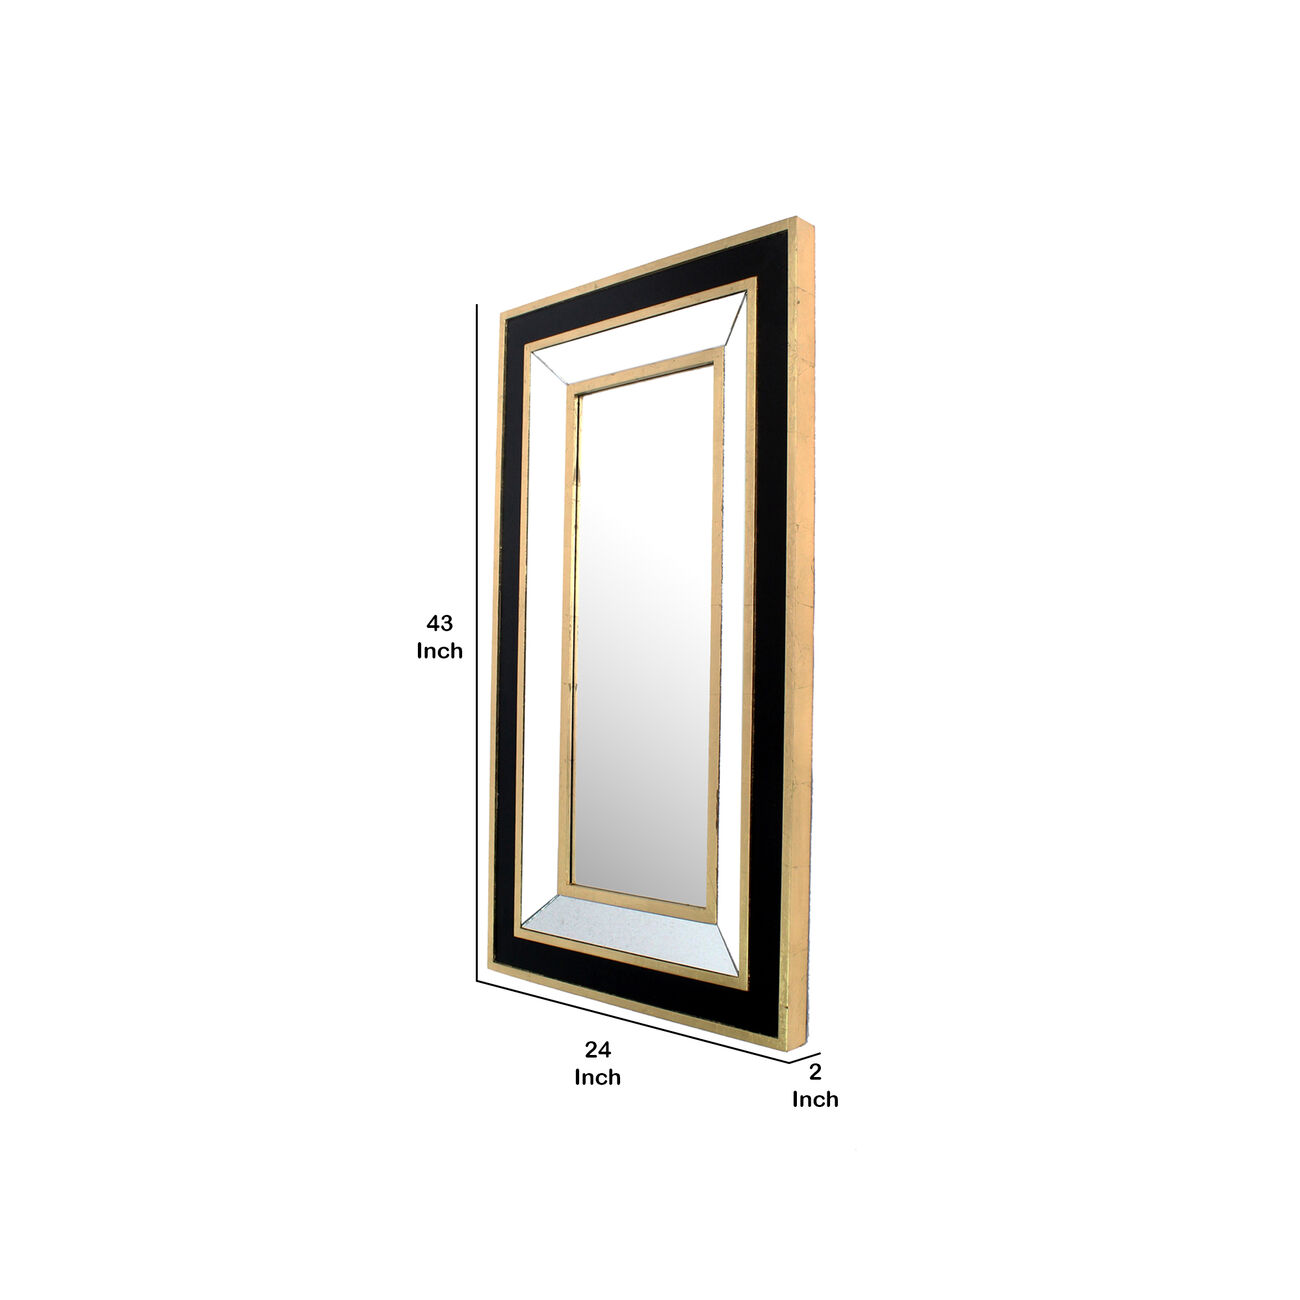 Rectangular Wooden Dressing Mirror with Beveled Edges, Black and Gold